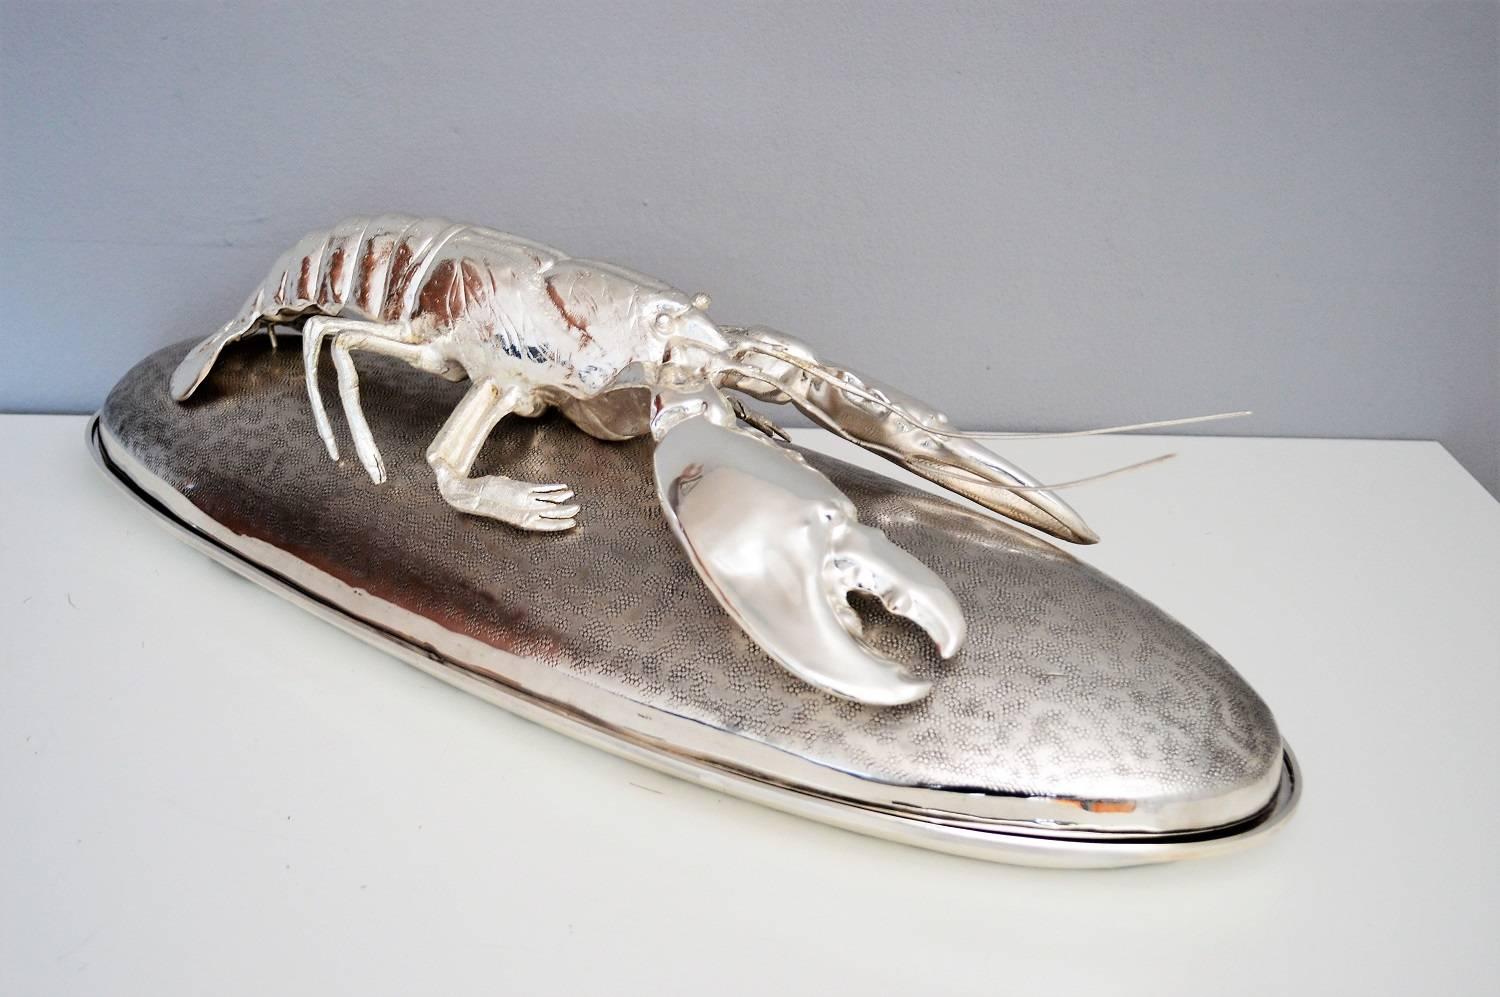 A magnificent and rare impressive silver plated lobster serving platter by Franco Lapini, Italy, 1970.
The large deep oval tray with wide hammered edge which is fitted with a conforming hammered lid surmounted a life-like cast lobster, all silver